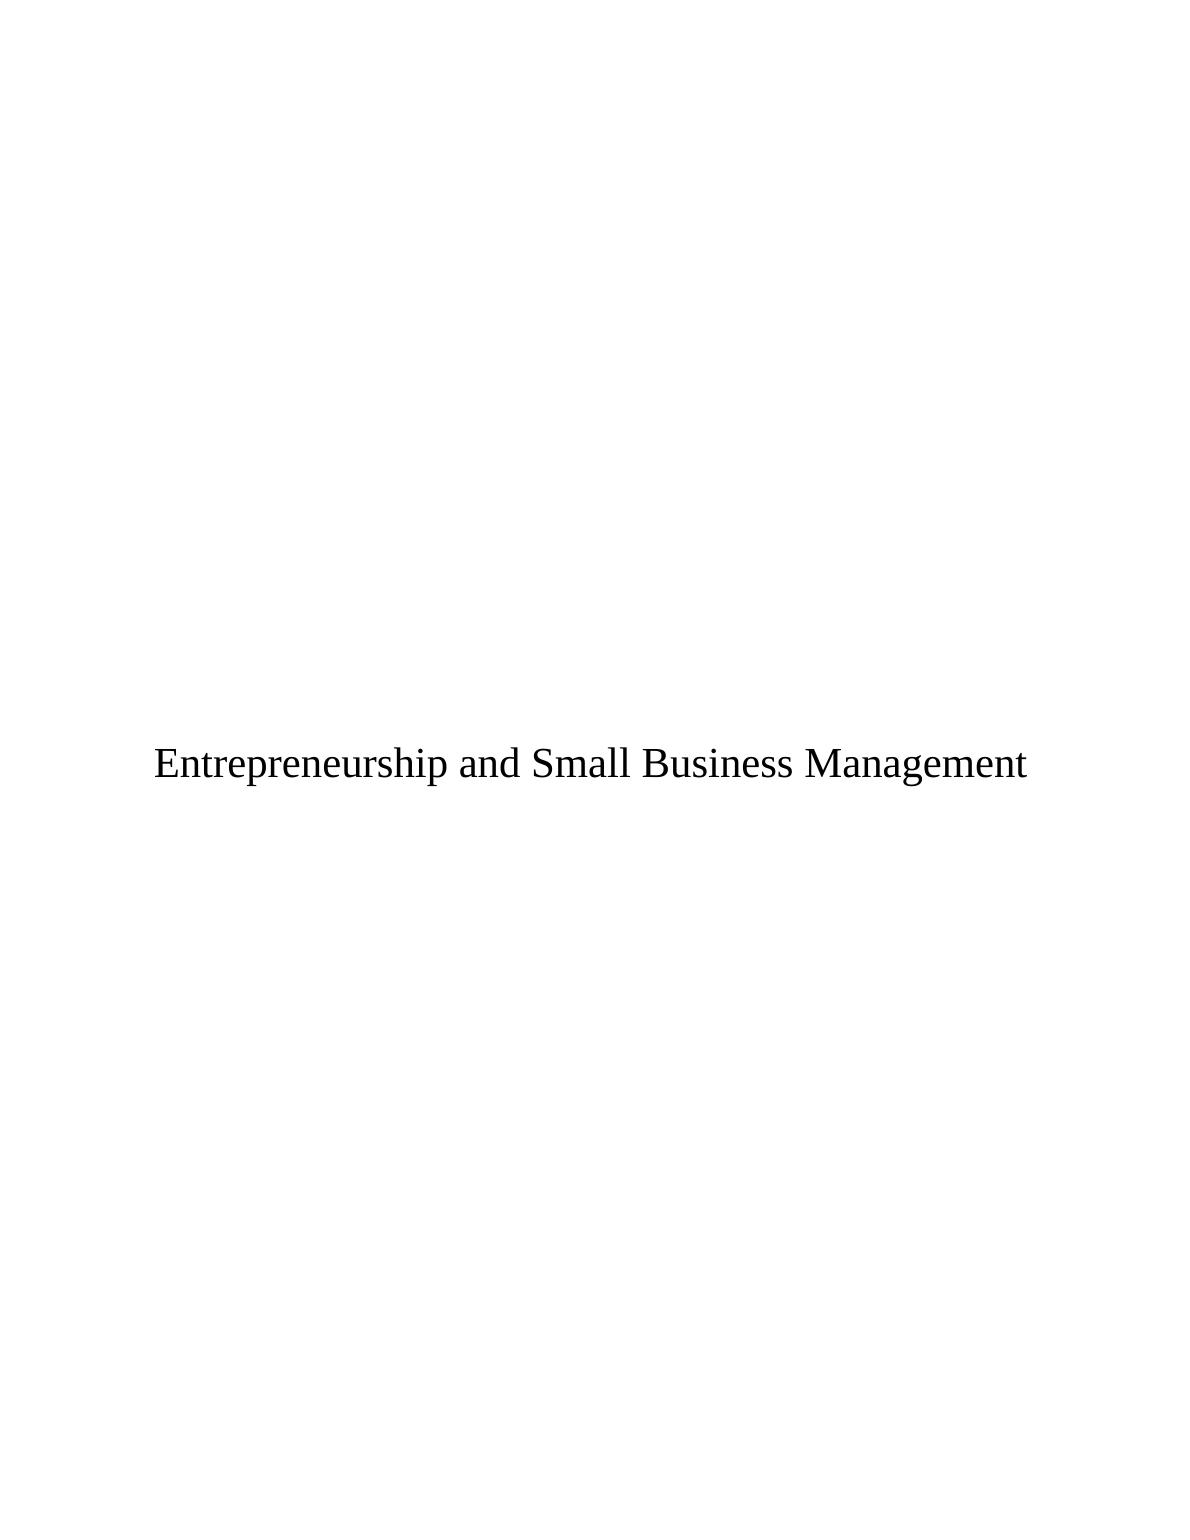 Entrepreneurship and Small Business Management Assignment : Microsoft_1